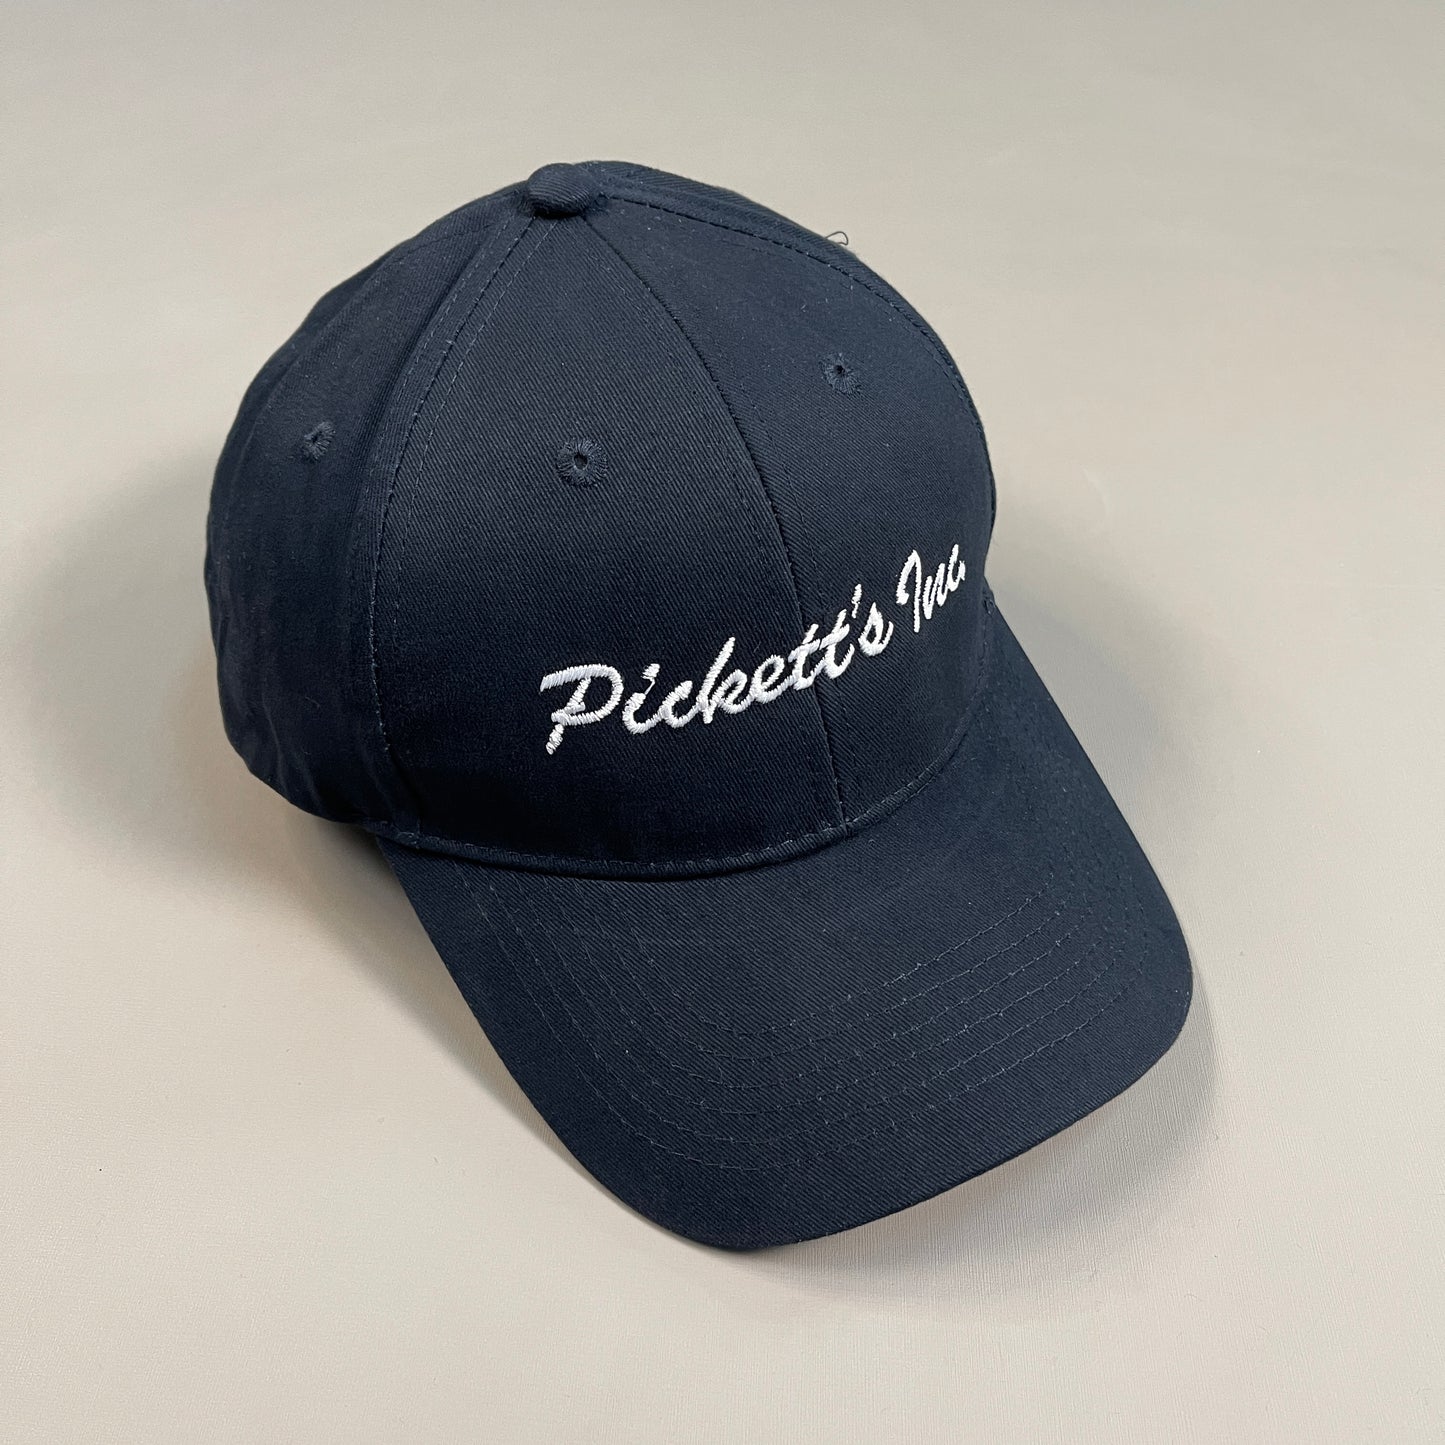 PACIFIC HEADWEAR 101C Cap "Pickett's Inc" Logo Adjustable Blue Embroidered Hat (New)